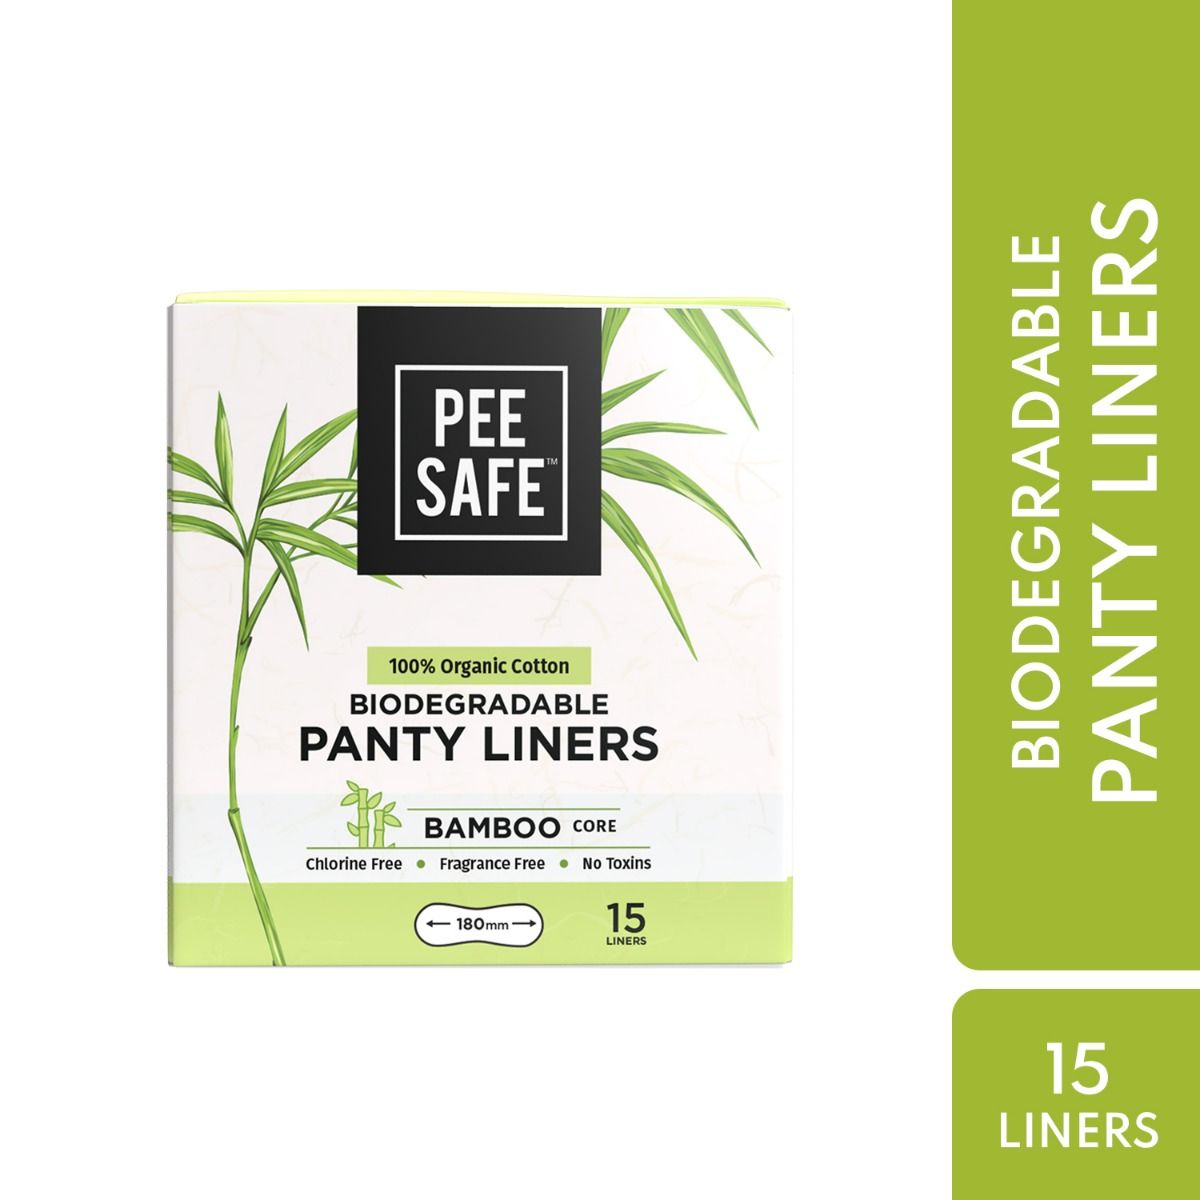 Buy Pee Safe 100% Organic Cotton Biodegradable Panty Liners, 15 Count Online